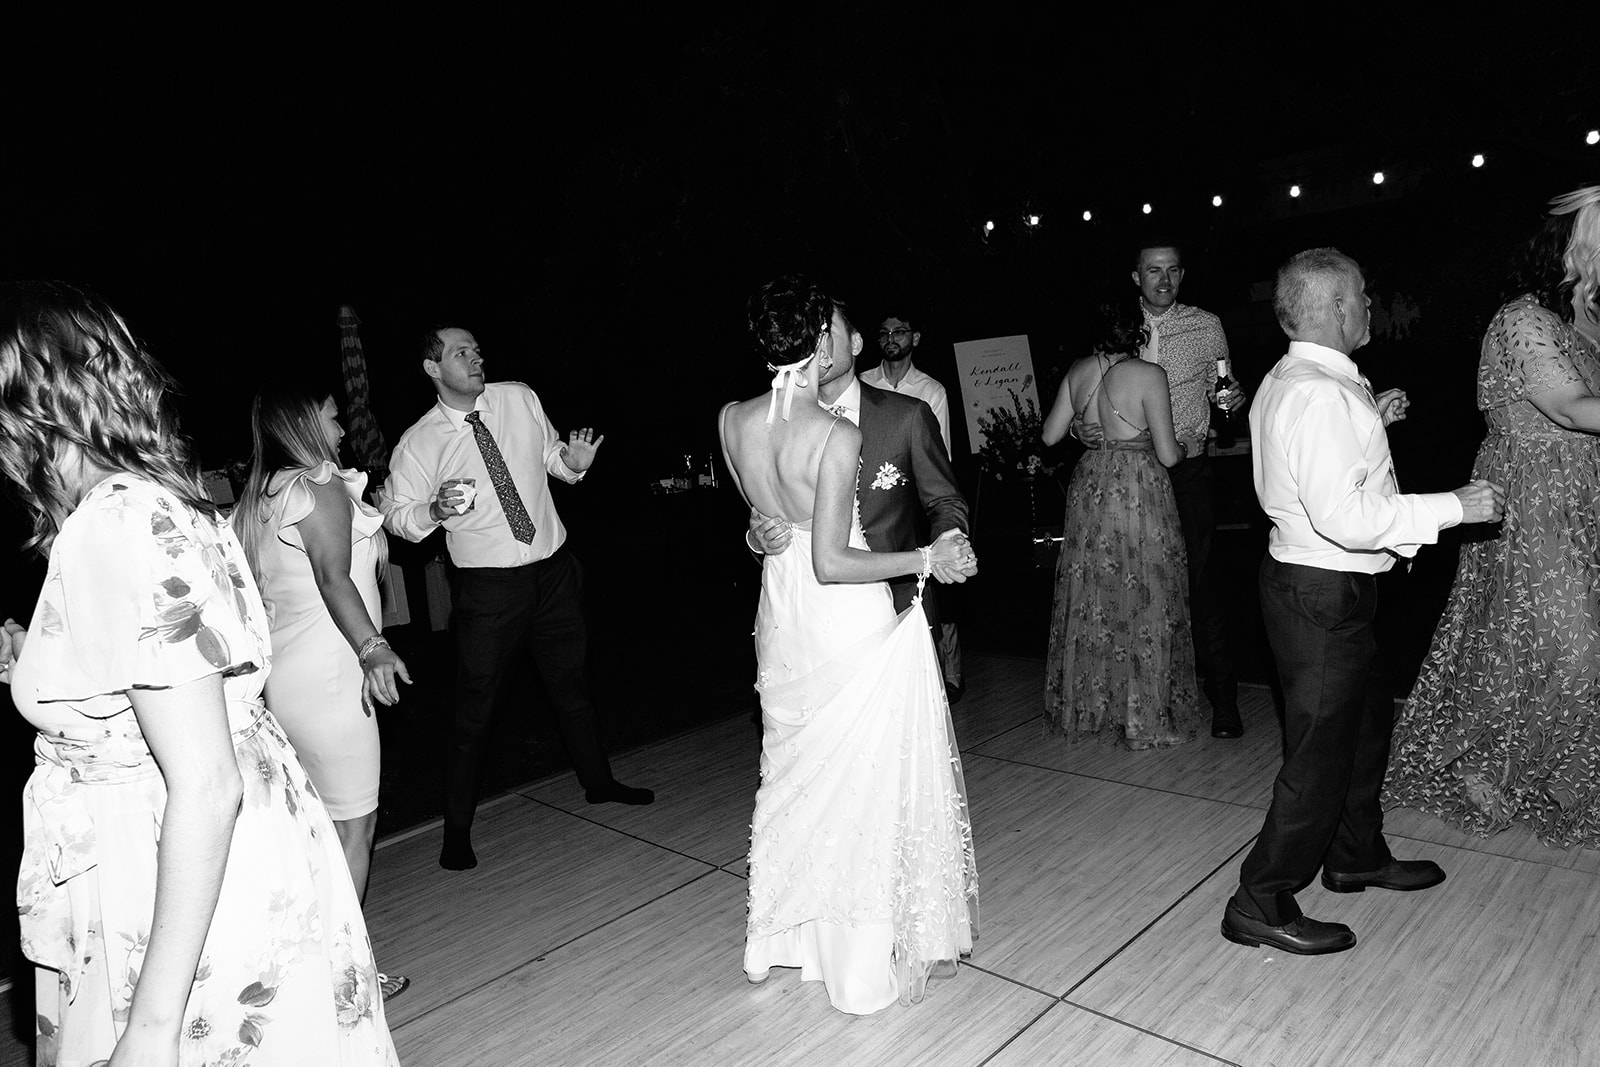 Two women in dresses dance joyfully at a nighttime outdoor wedding reception, surrounded by other guests.